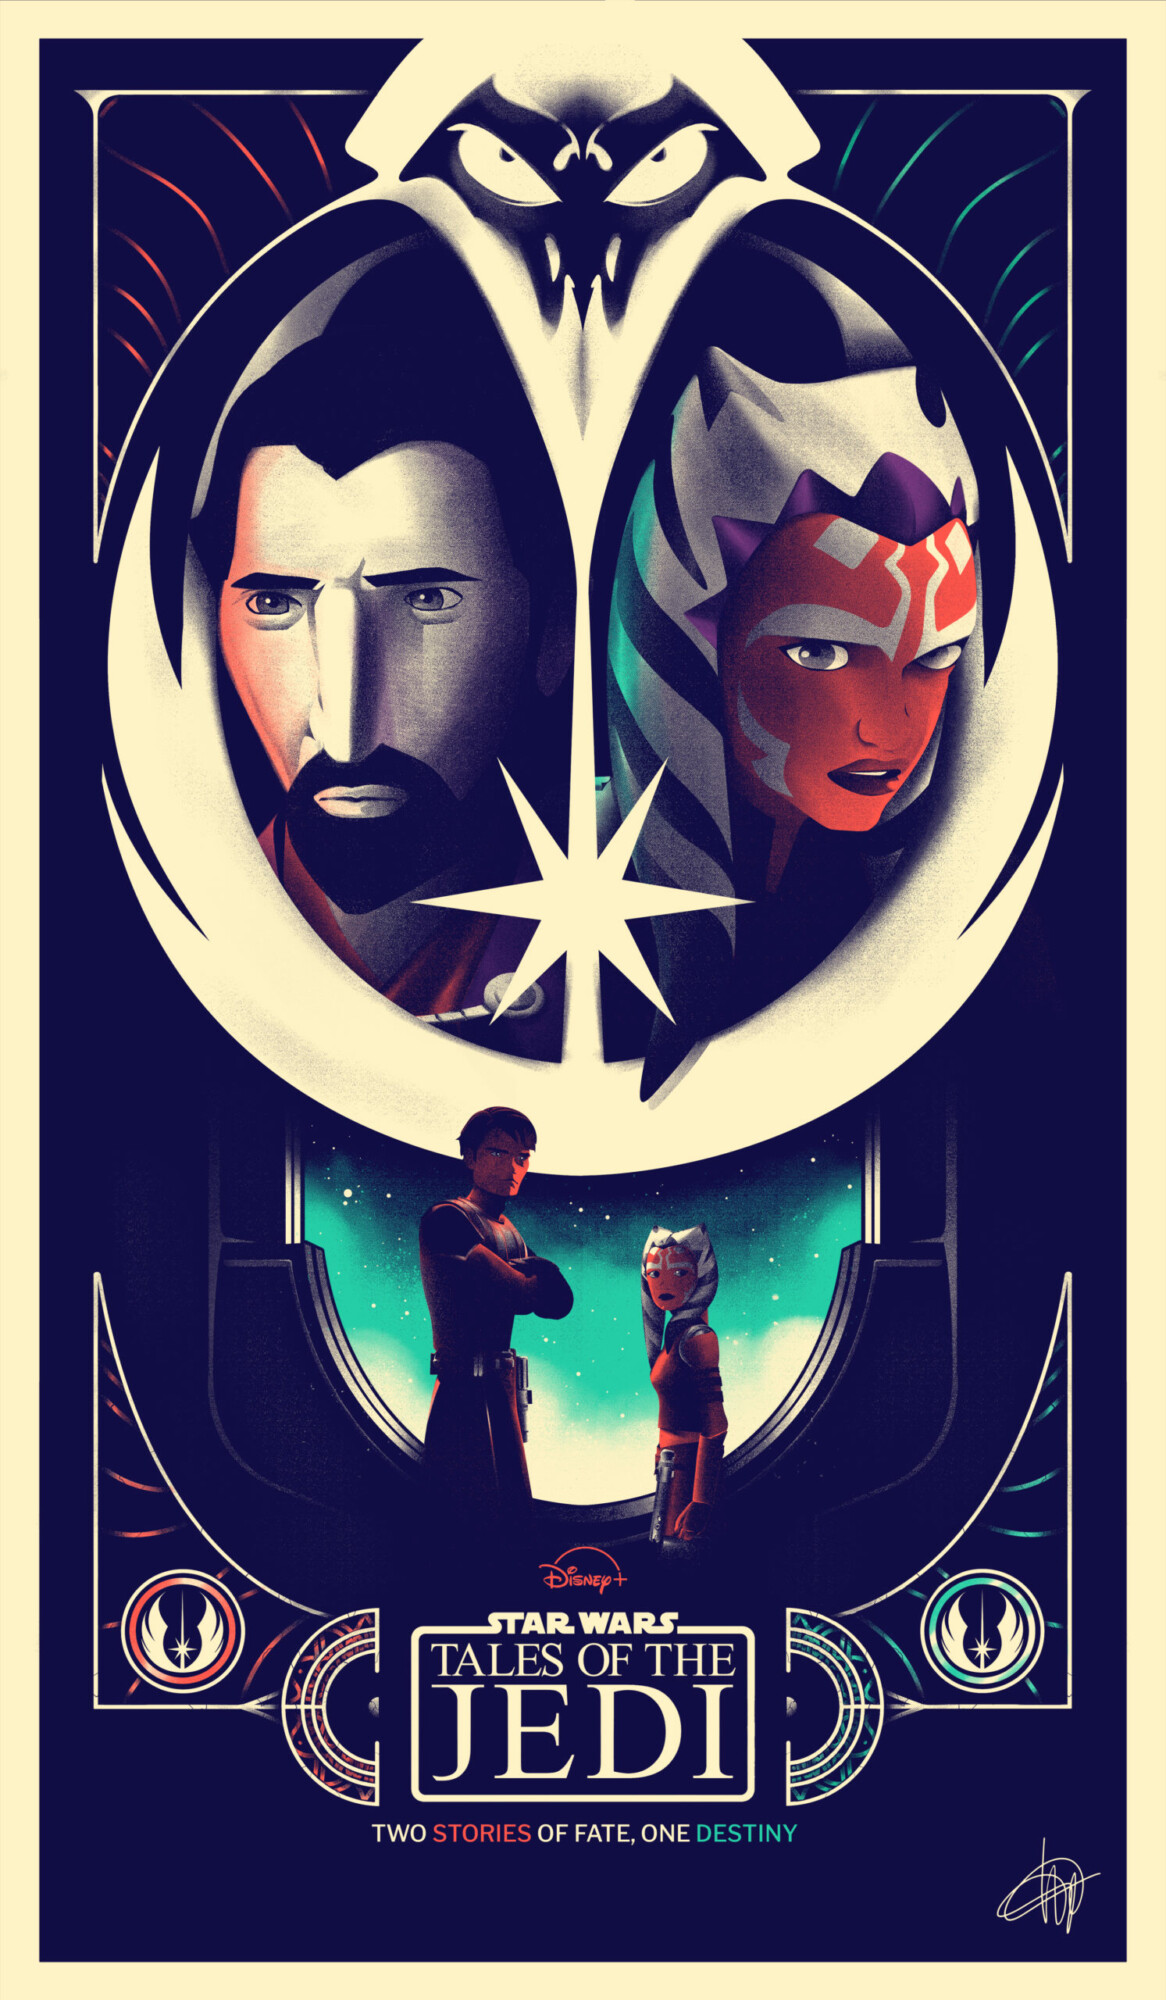 TALES OF THE JEDI Poster Art